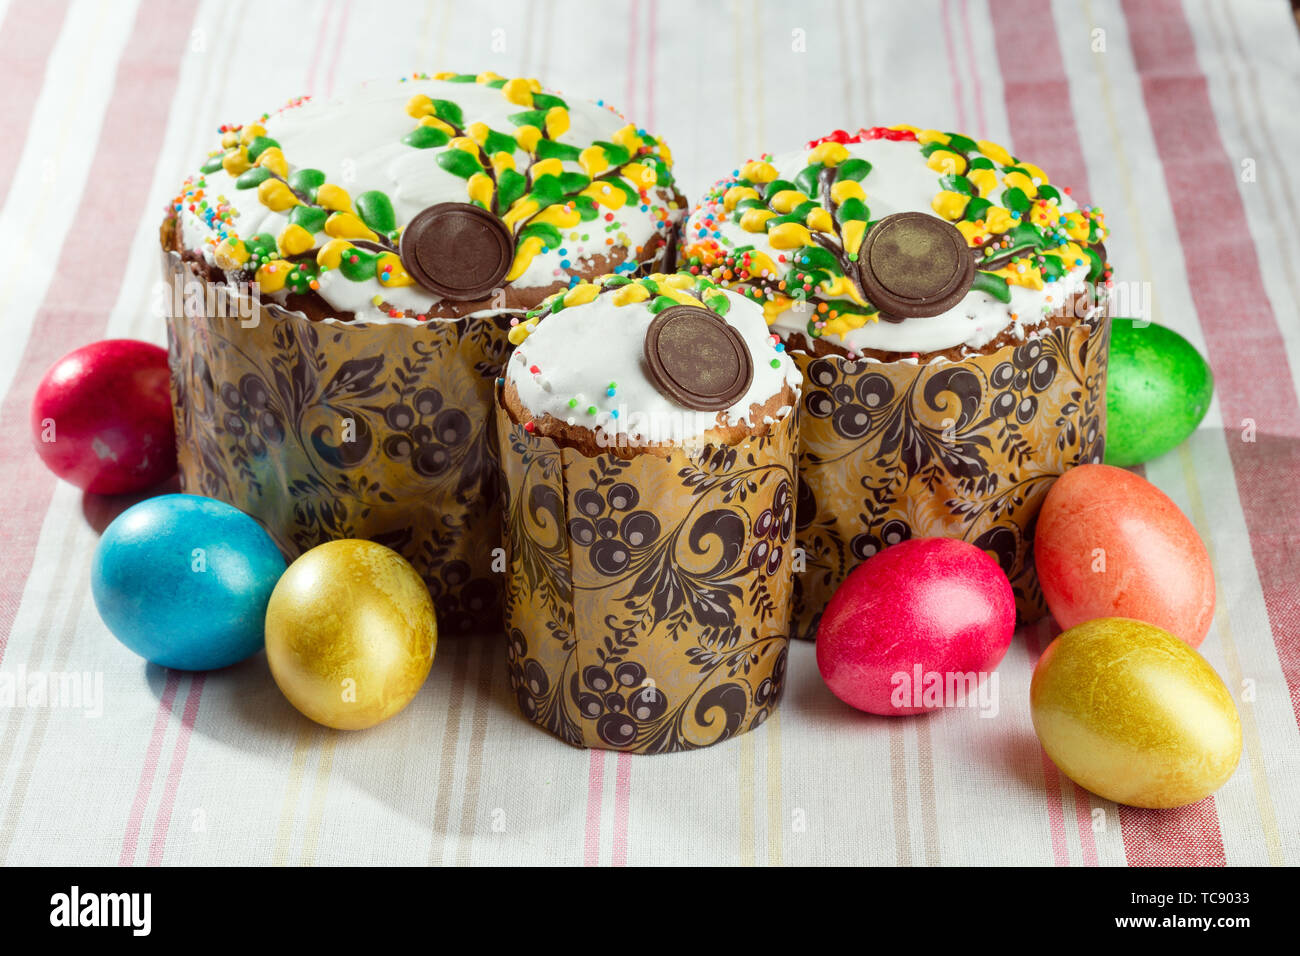 Russian Easter Bread Kulich Paska Decorated With Painted